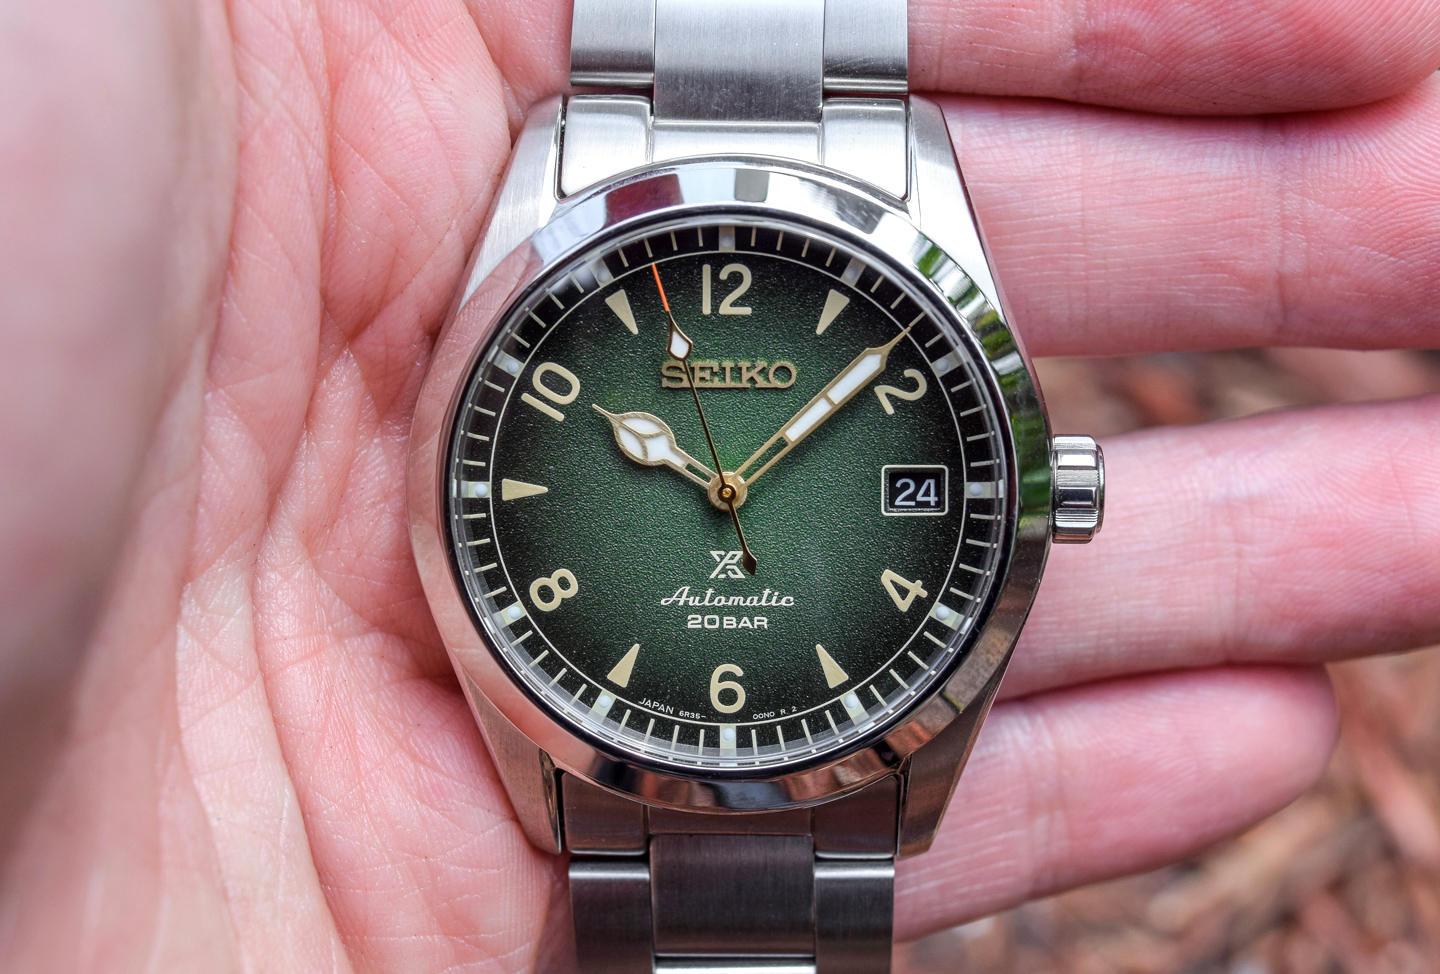 seiko alpinist 38mm review - Today's Deals - Up To 75% Off